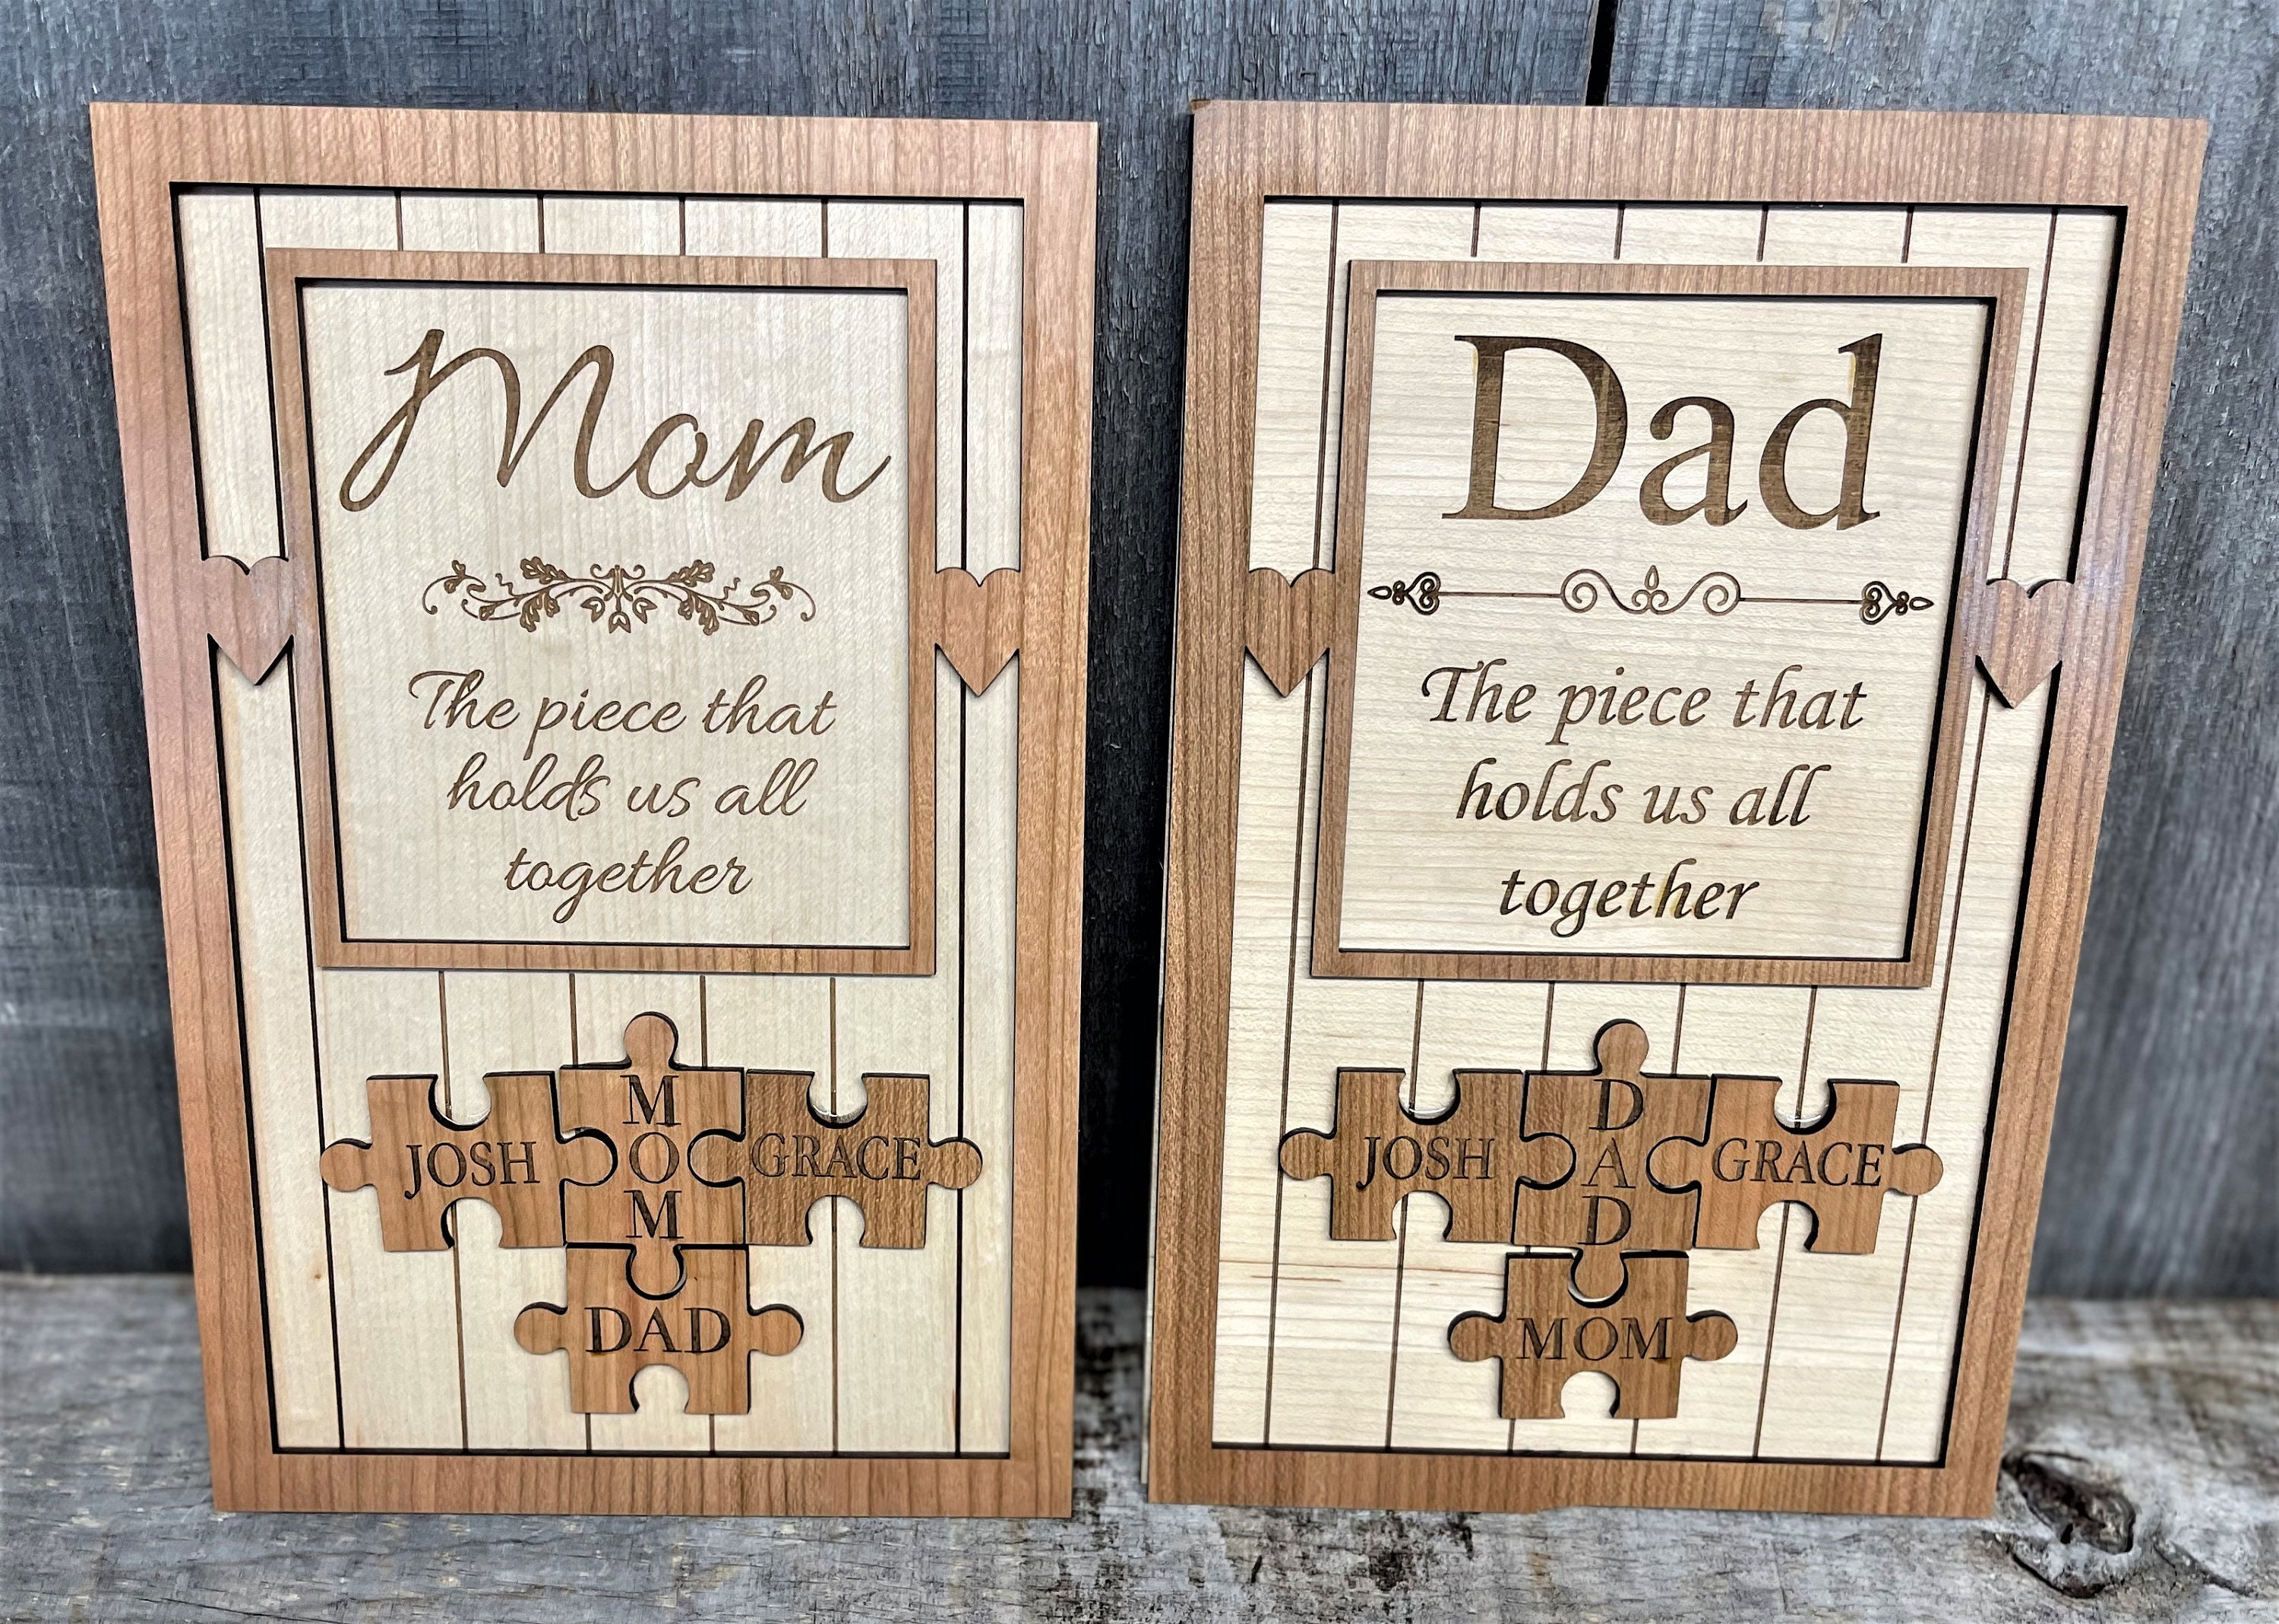 Mom You Are The Piece That Holds Us Together - Mother's Day Gift – The  InSpirited Home